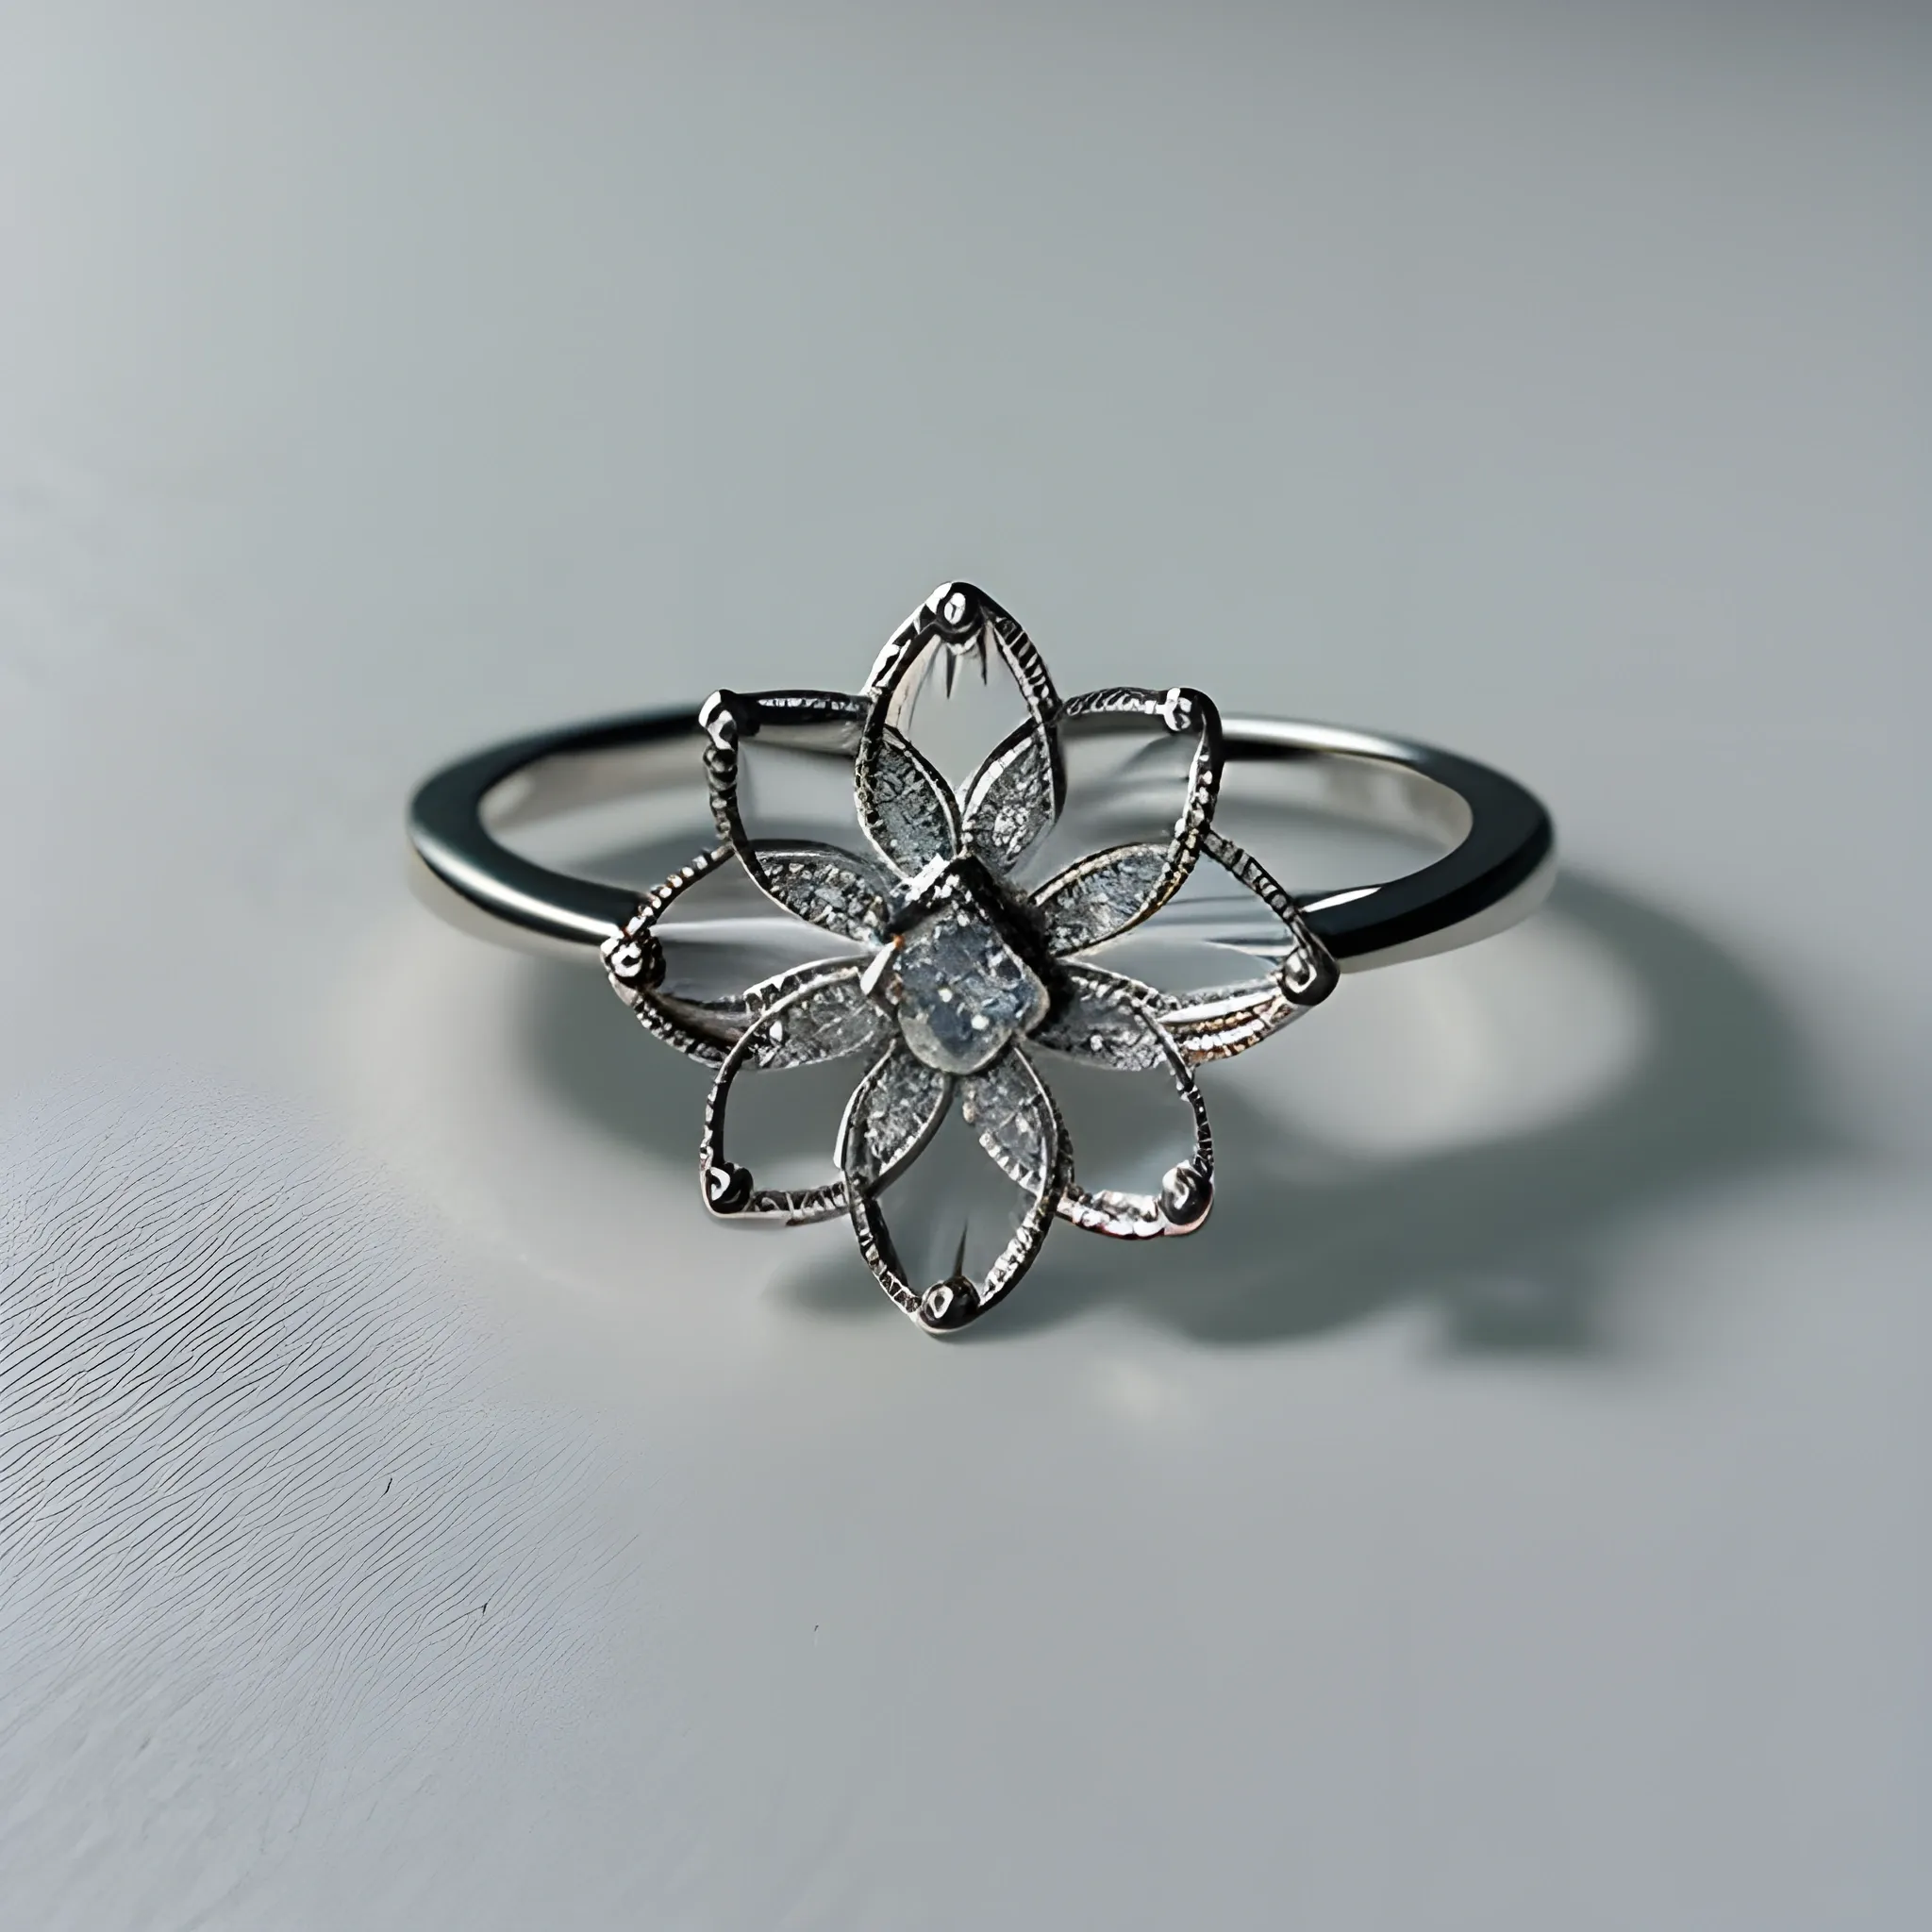  a flower-shaped ring with a central white 0,05 carat brilliant surrounded by only 6 piece of little drop shaped brown diamonds, 3D, Pencil Sketch